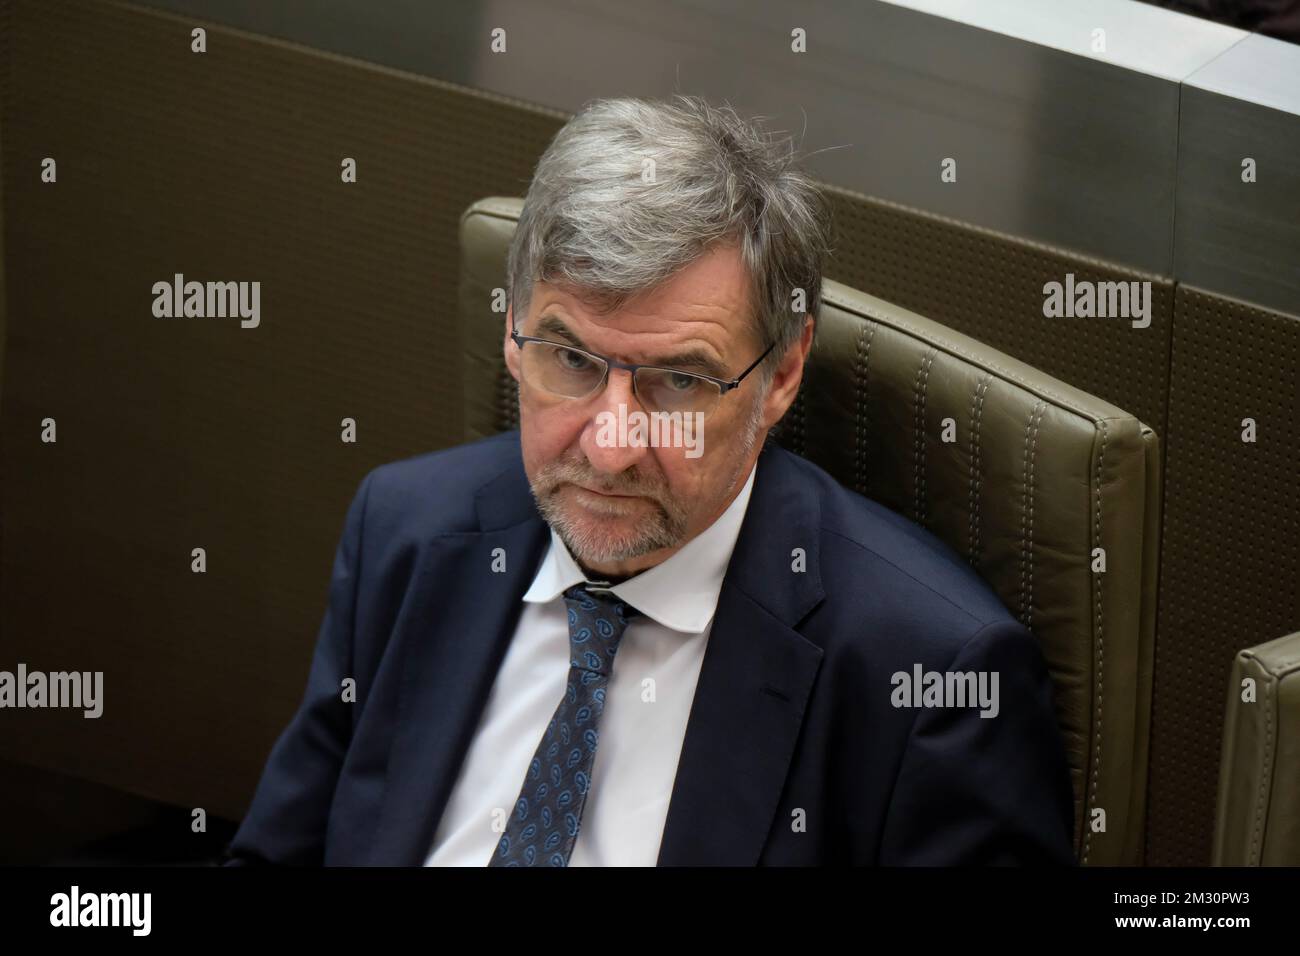 N-VA's group chairman Wilfried Vandaele pictured during a plenary session of the Flemish Parliament in Brussels, Friday 04 October 2019. The parliament will debate on the government declaration that was presented by the newly formed Flemish government. Opposition parties want to receive detailed numbers concerning the budget. BELGA PHOTO NICOLAS MAETERLINCK Stock Photo